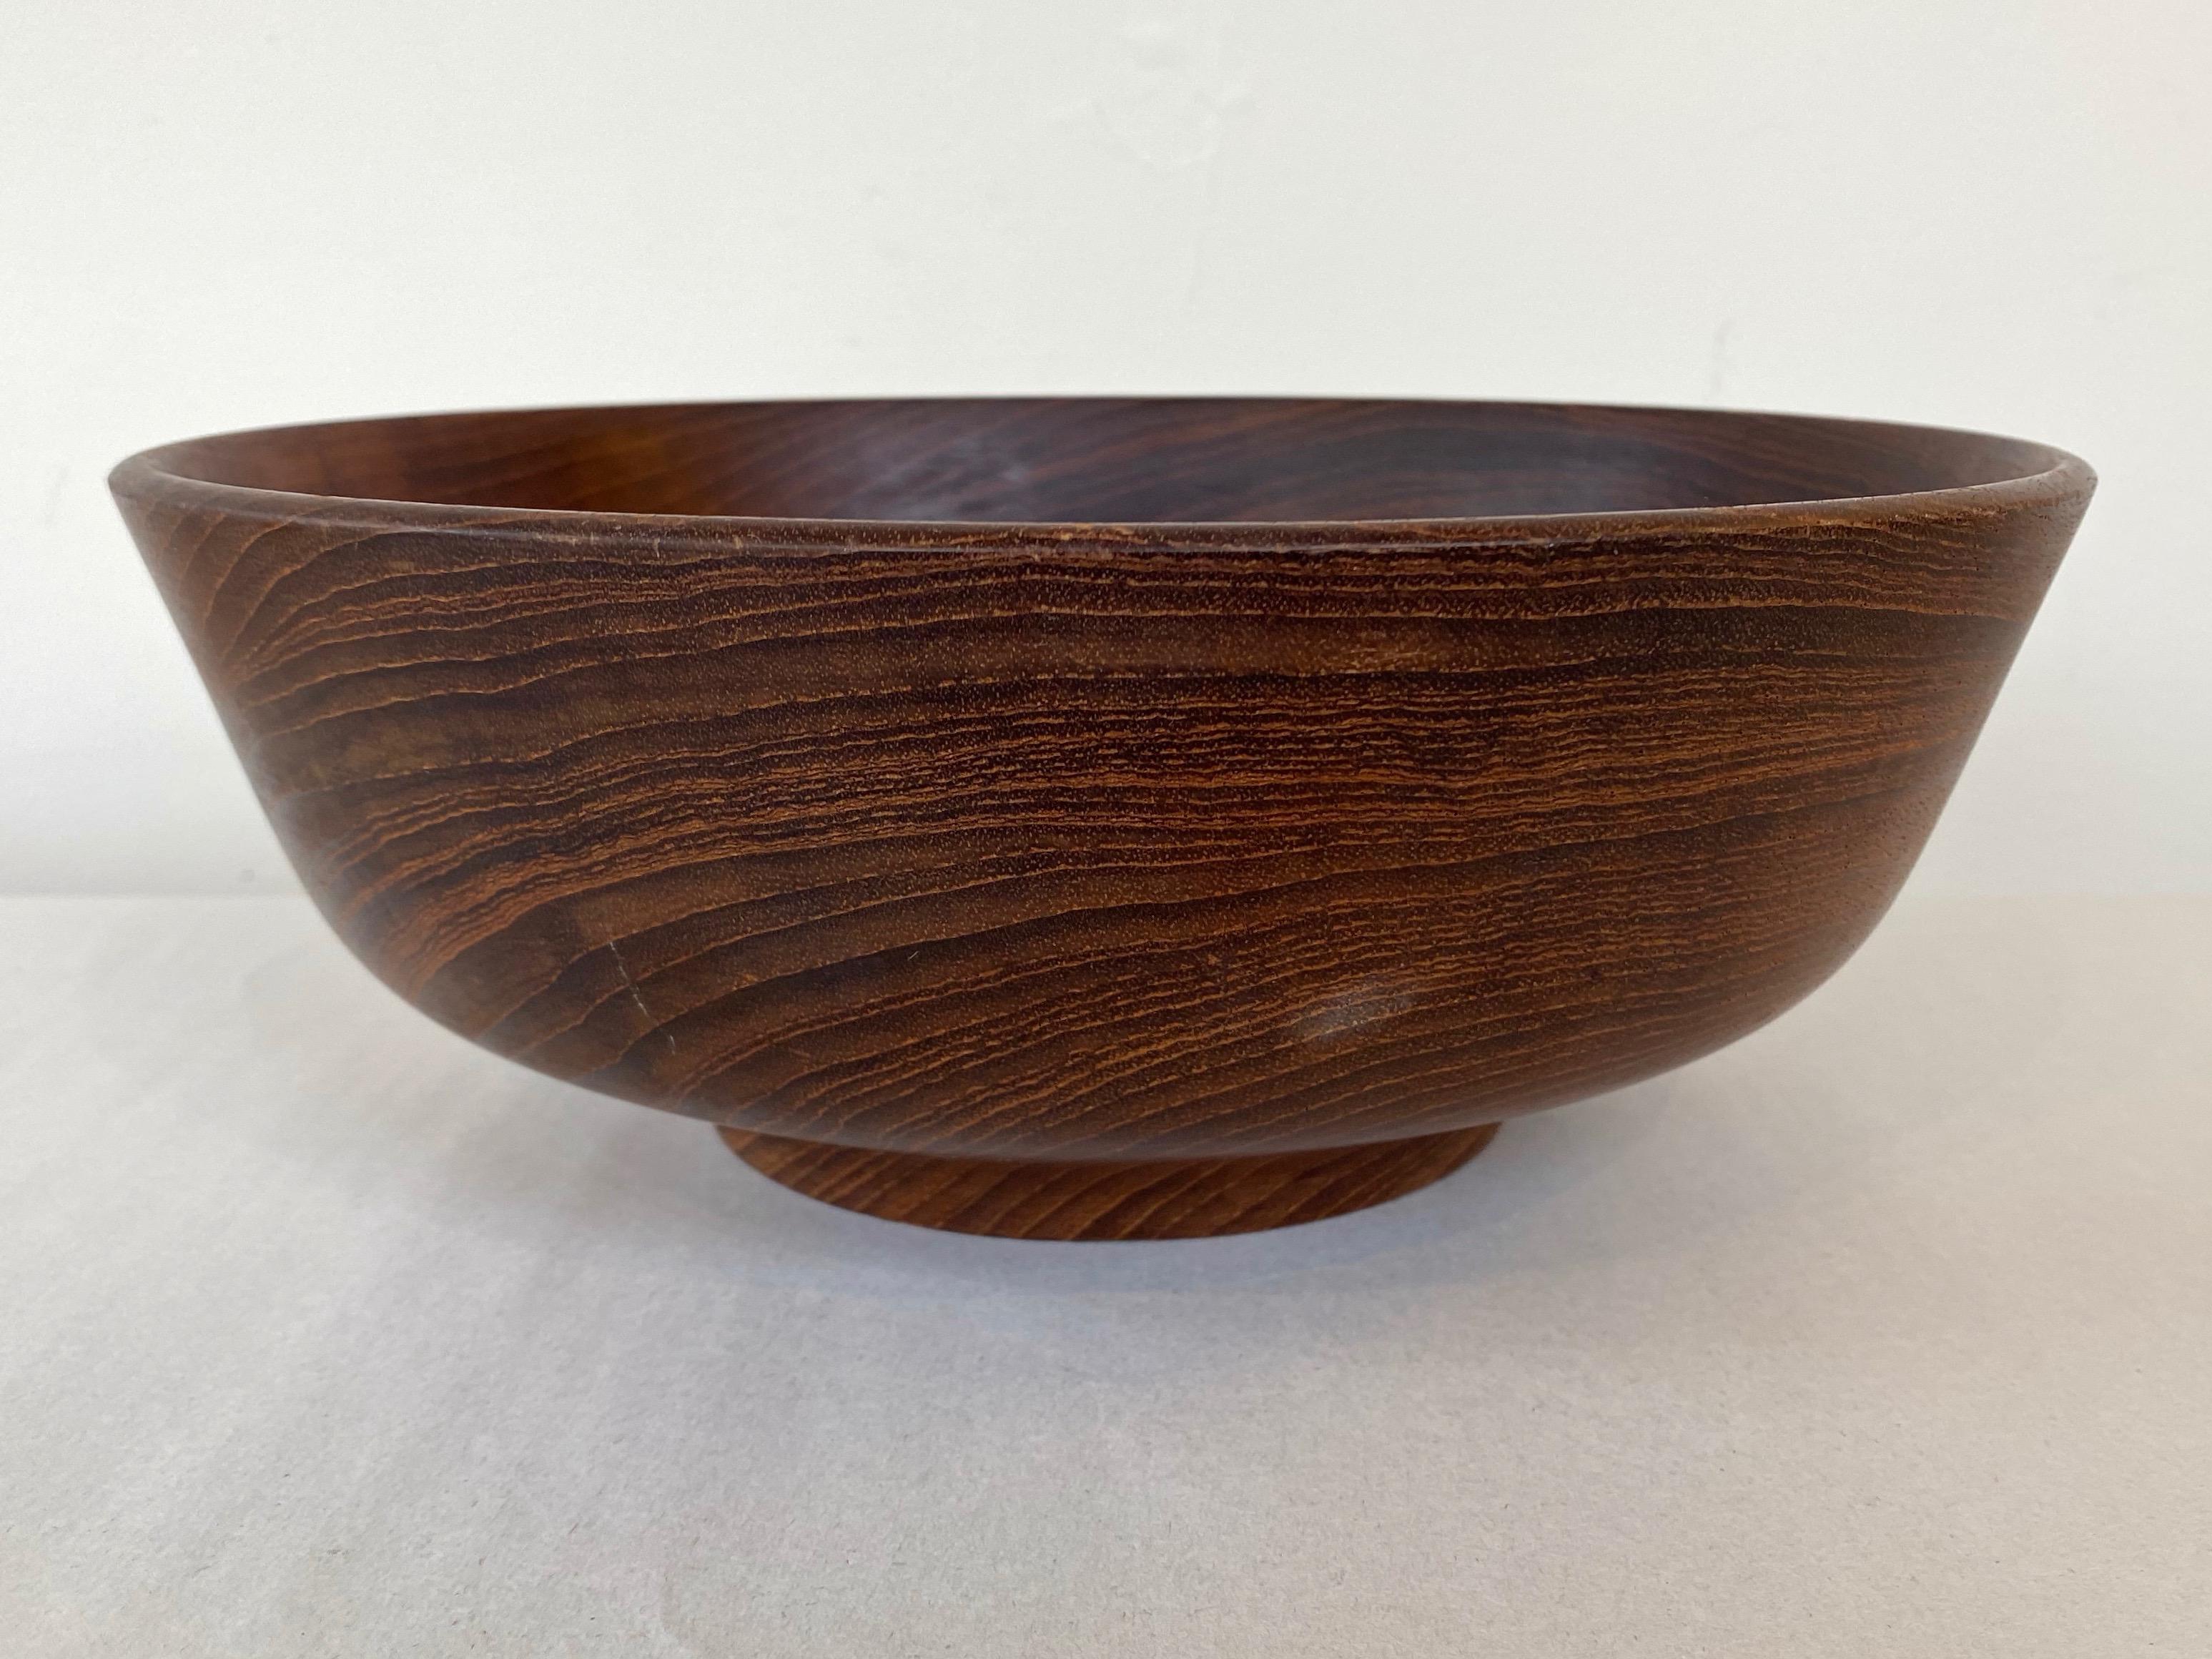 Bob Stocksdale Teak Turned Wood Bowl with Exceptional Grain Pattern, Early 1970s For Sale 1